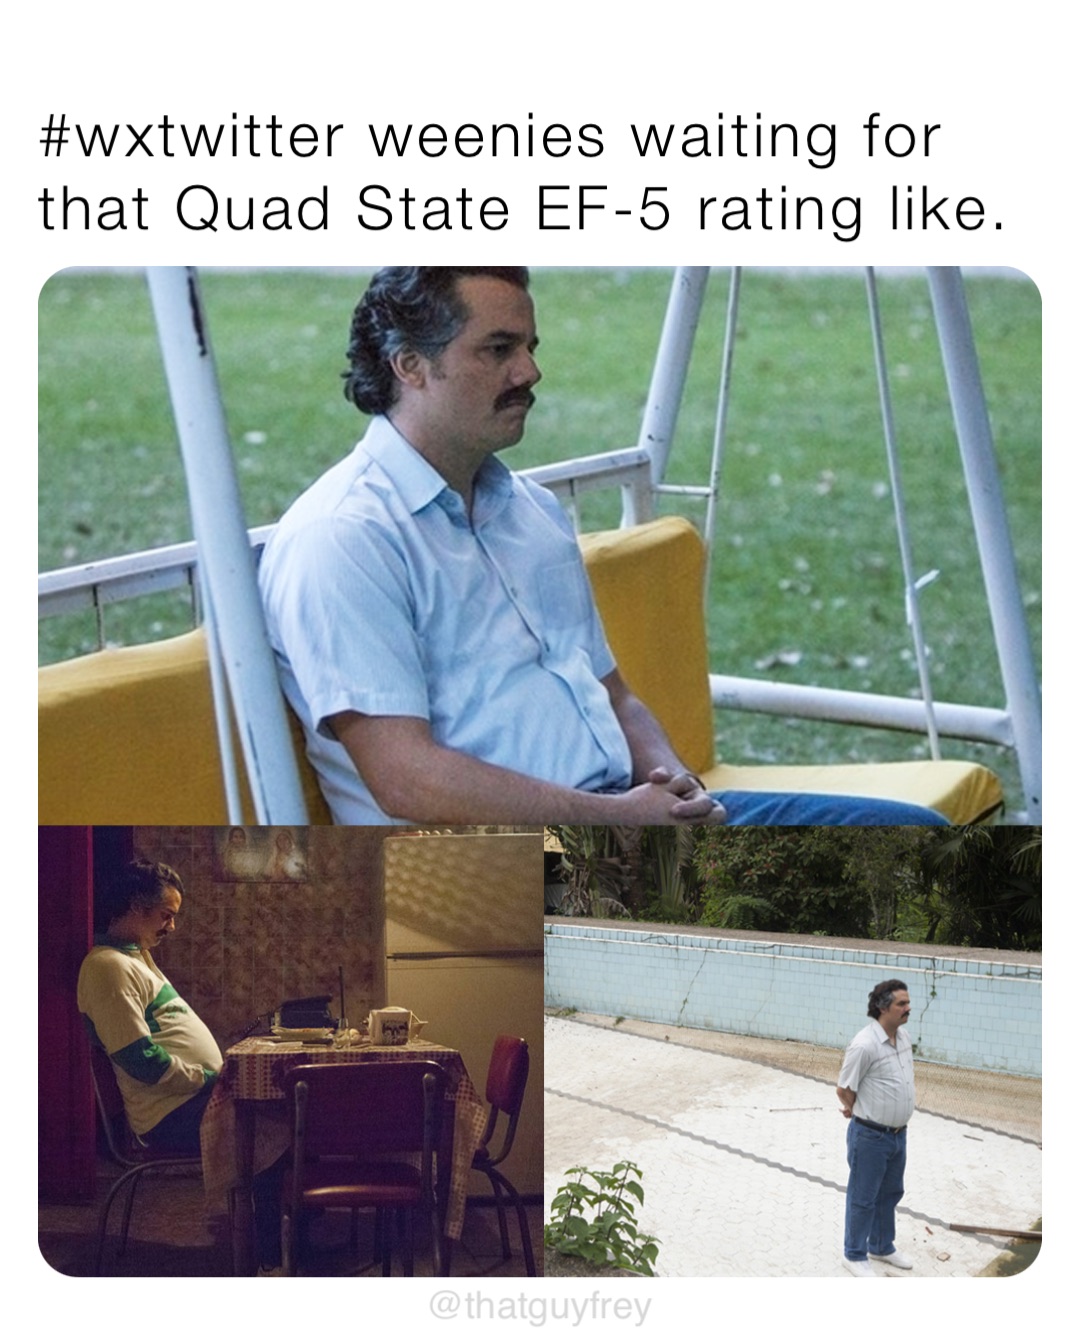 #wxtwitter weenies waiting for that Quad State EF-5 rating like.